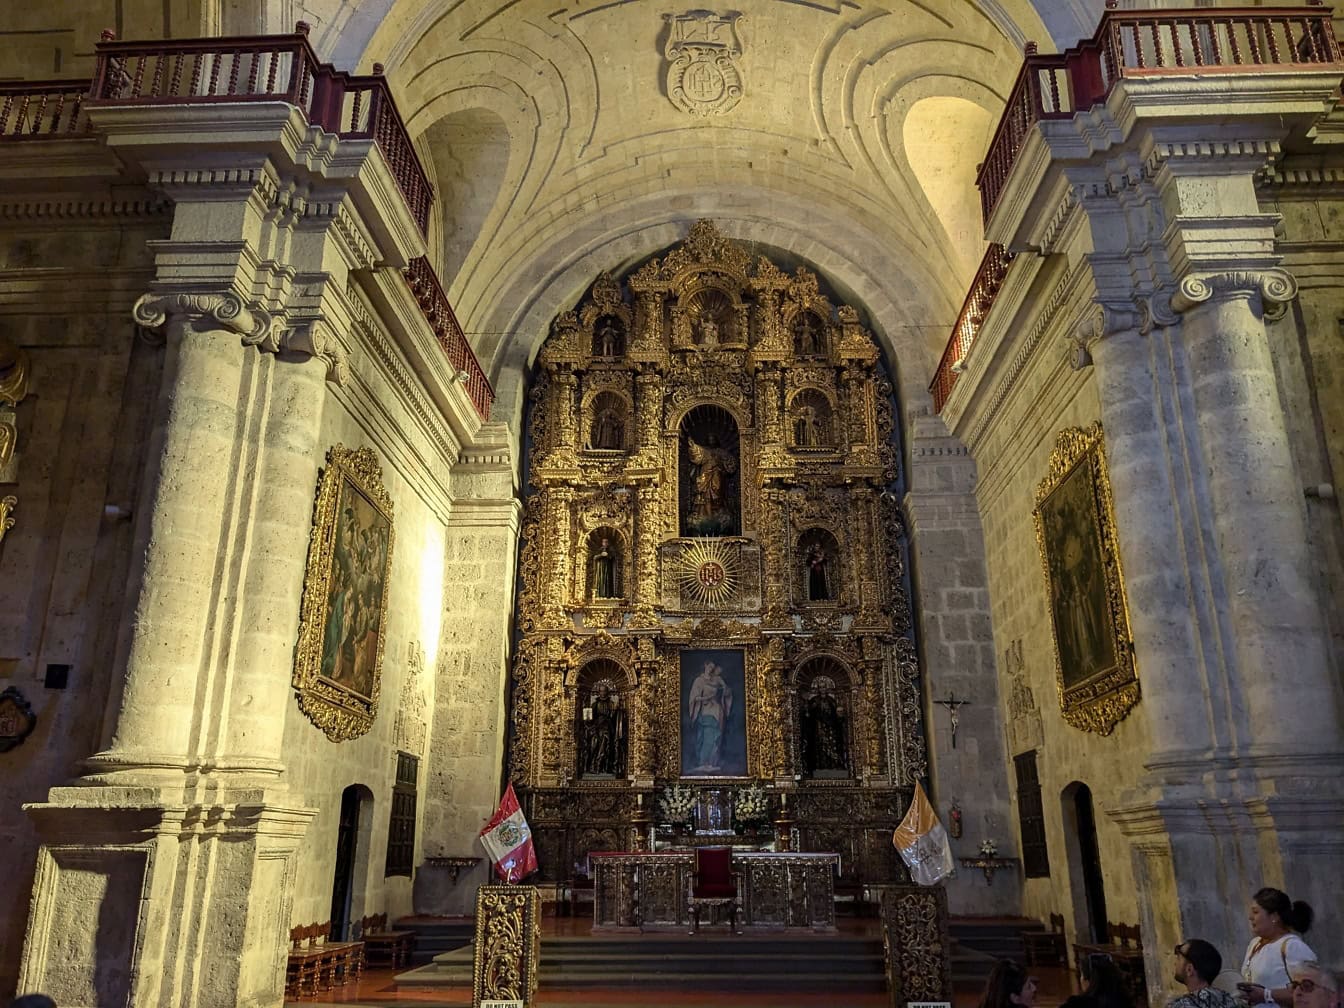 Large ornate altar with an icons at the church of the Society of Jesus of Arequipa in Peru, Latin America